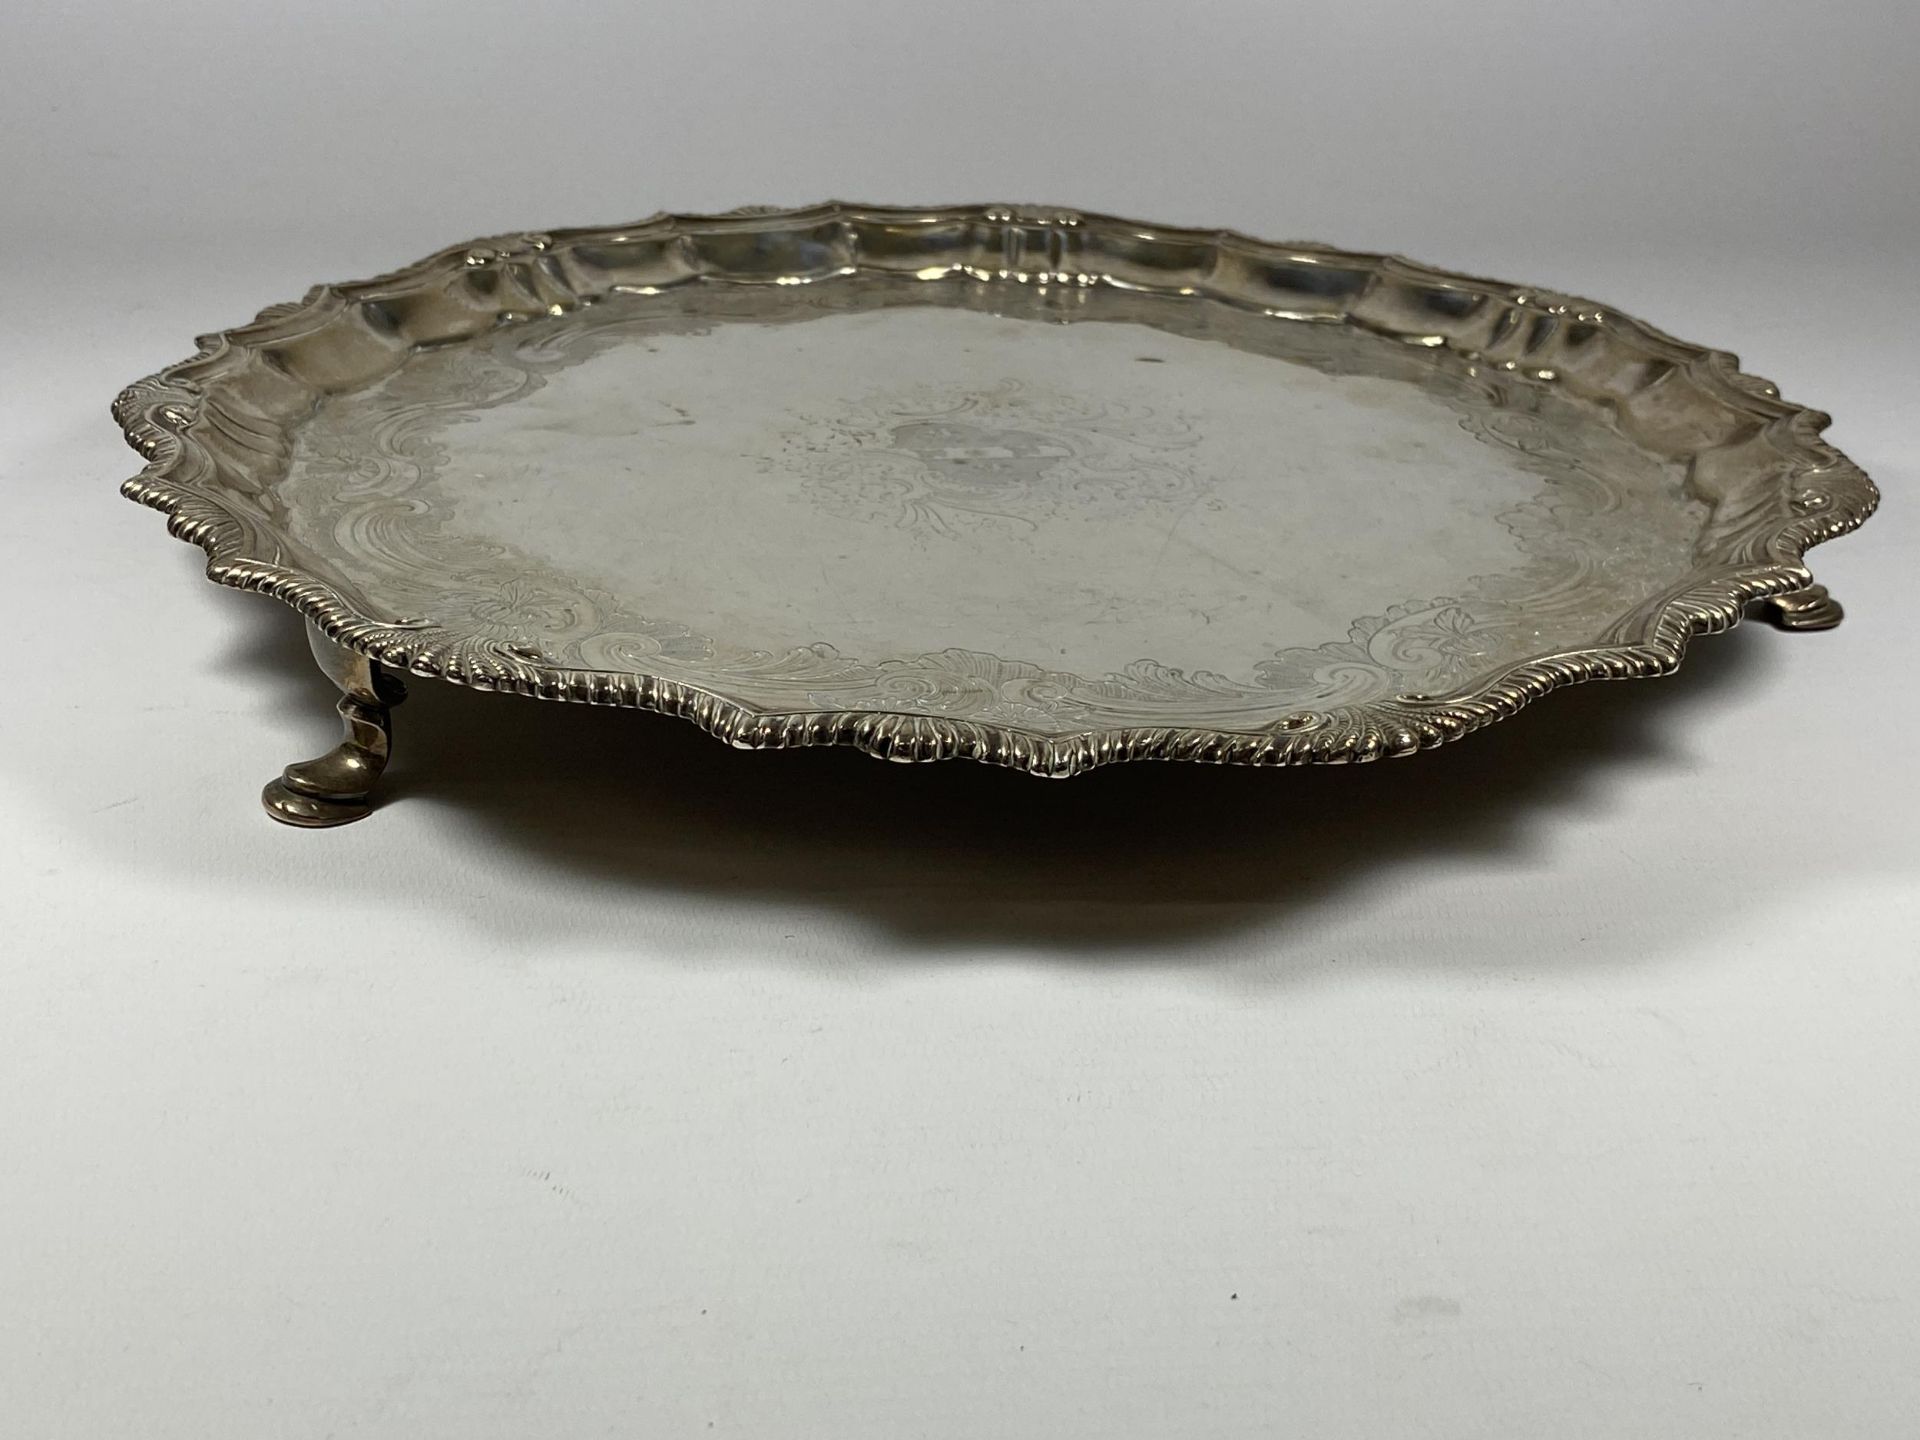 A GEORGE II SILVER SALVER BY DOROTHY MILLS, HALLMARKS FOR LONDON 1753, DIAMETER 33CM, WEIGHT 836G - Image 2 of 8